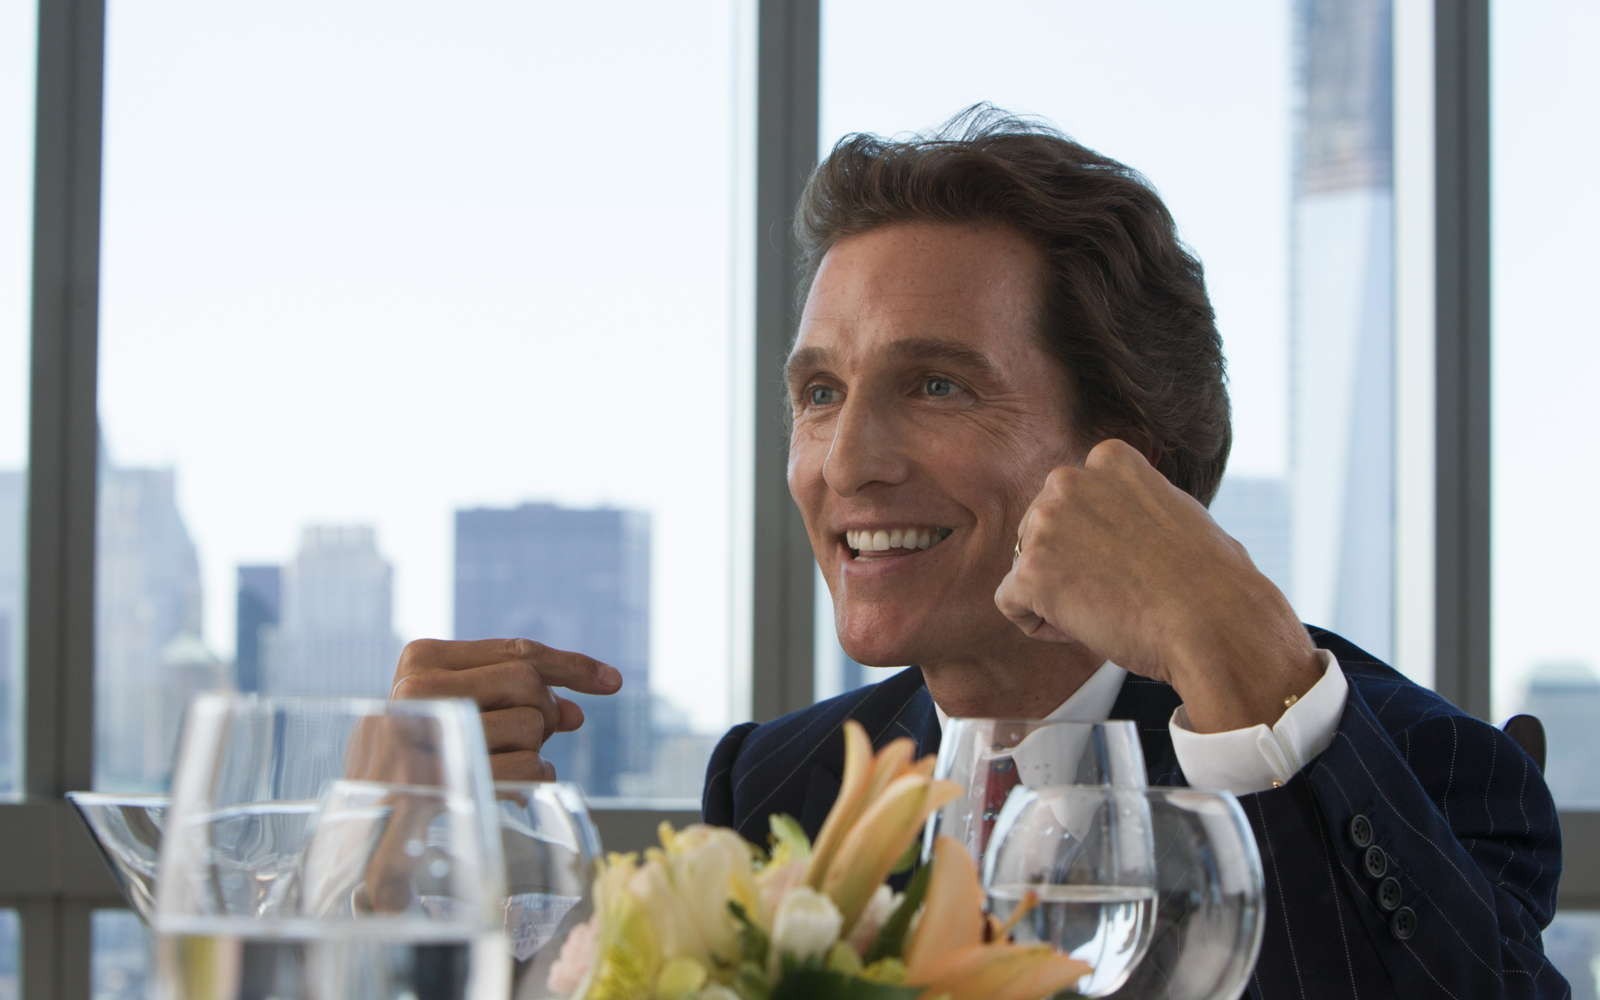 Matthew McConaughey stars as Mark Hanna in Paramount Pictures' The Wolf of Wall Street (2013)